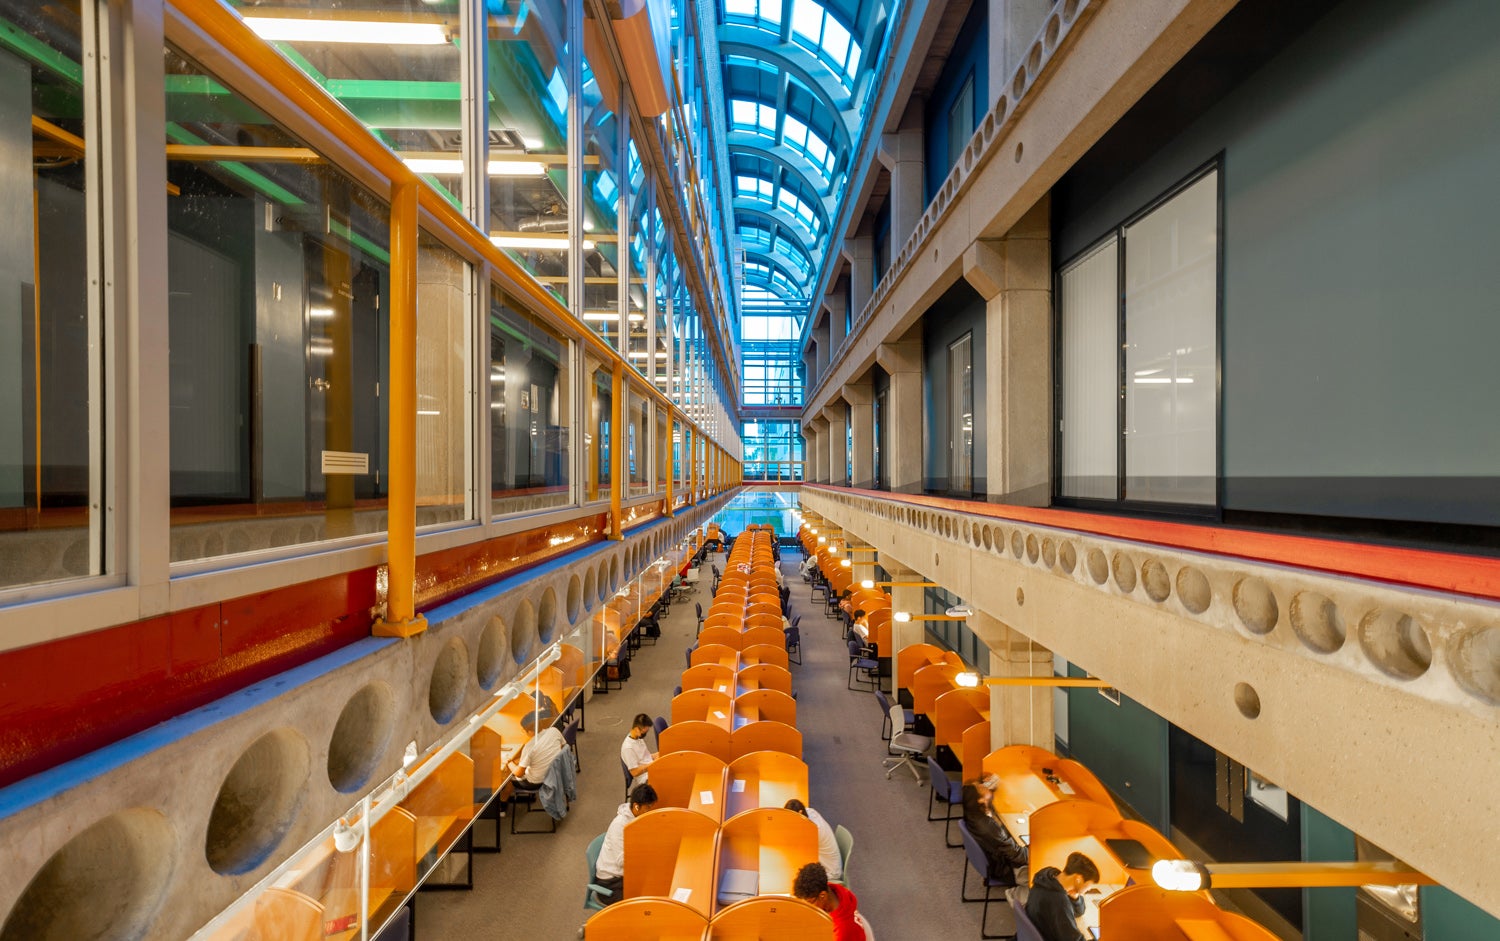 David Centre (a multi-story building with a glass roof and orange tables)